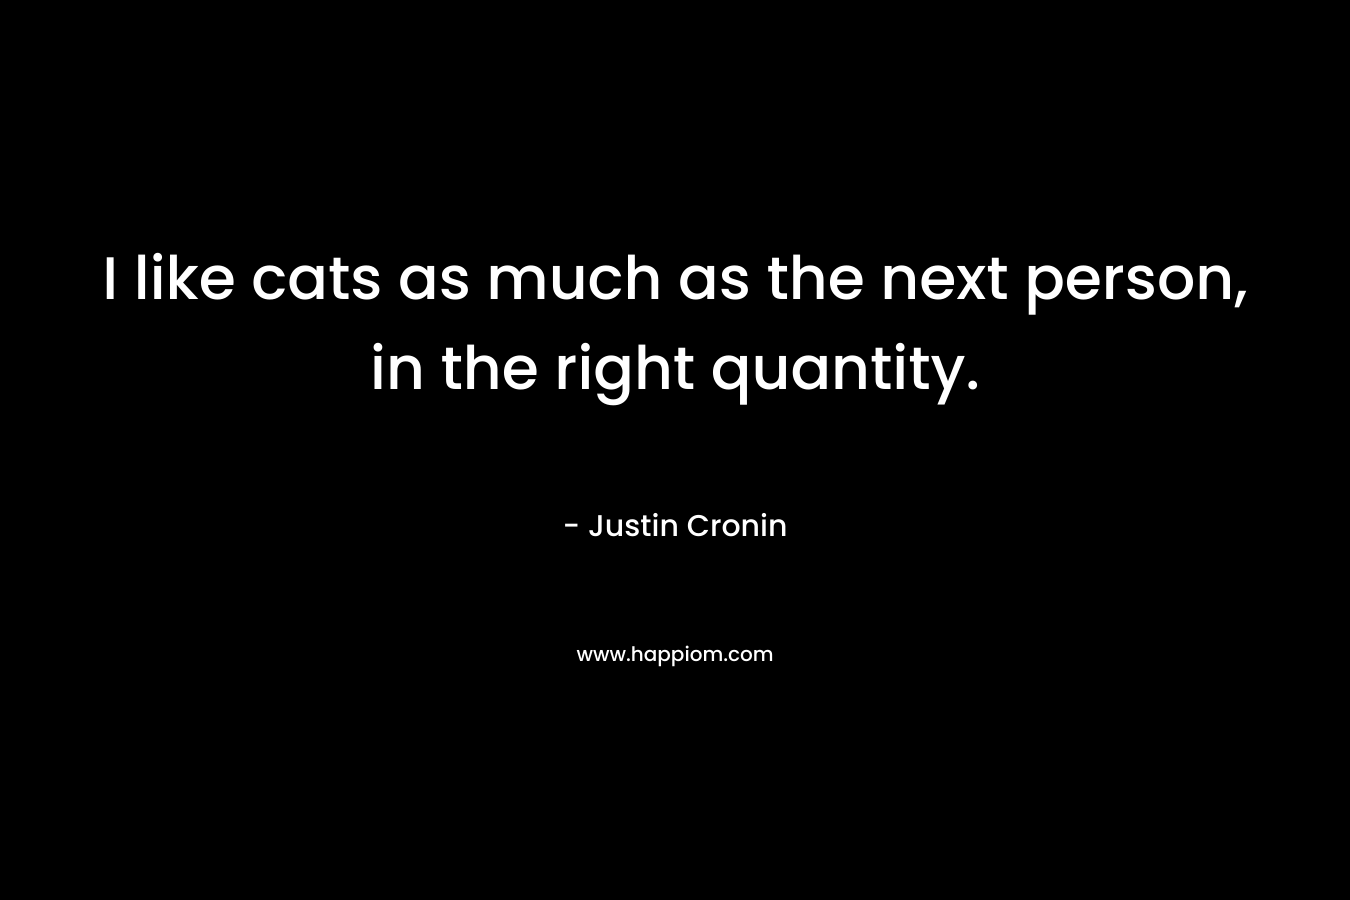 I like cats as much as the next person, in the right quantity. – Justin Cronin